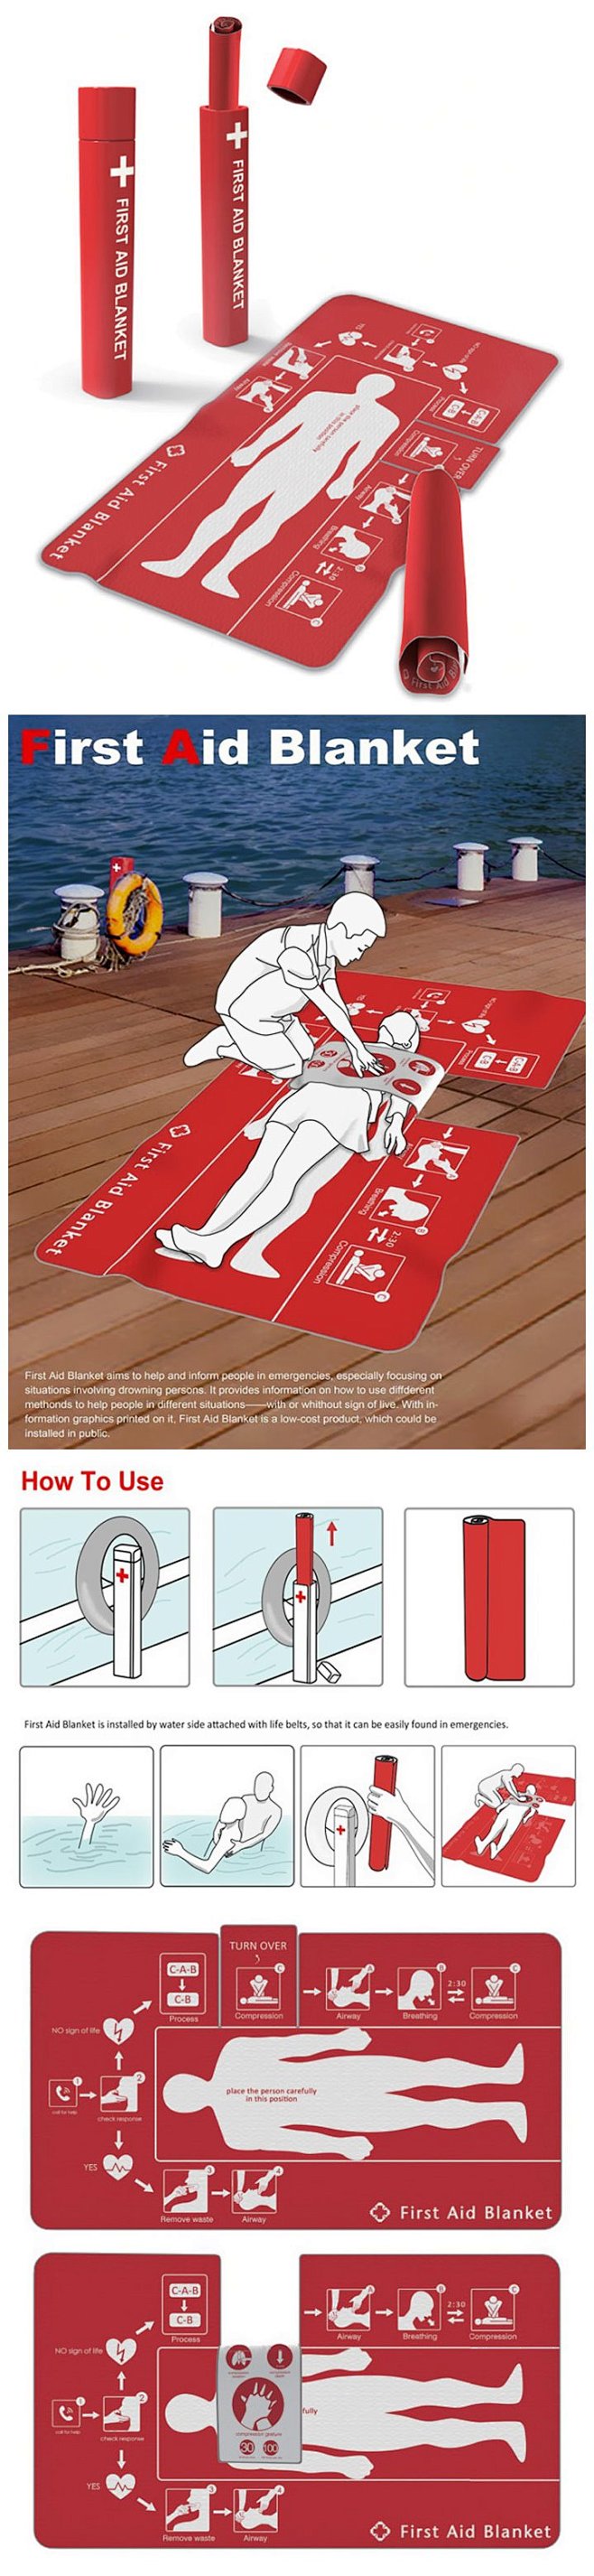 【First Aid Blanket 有...